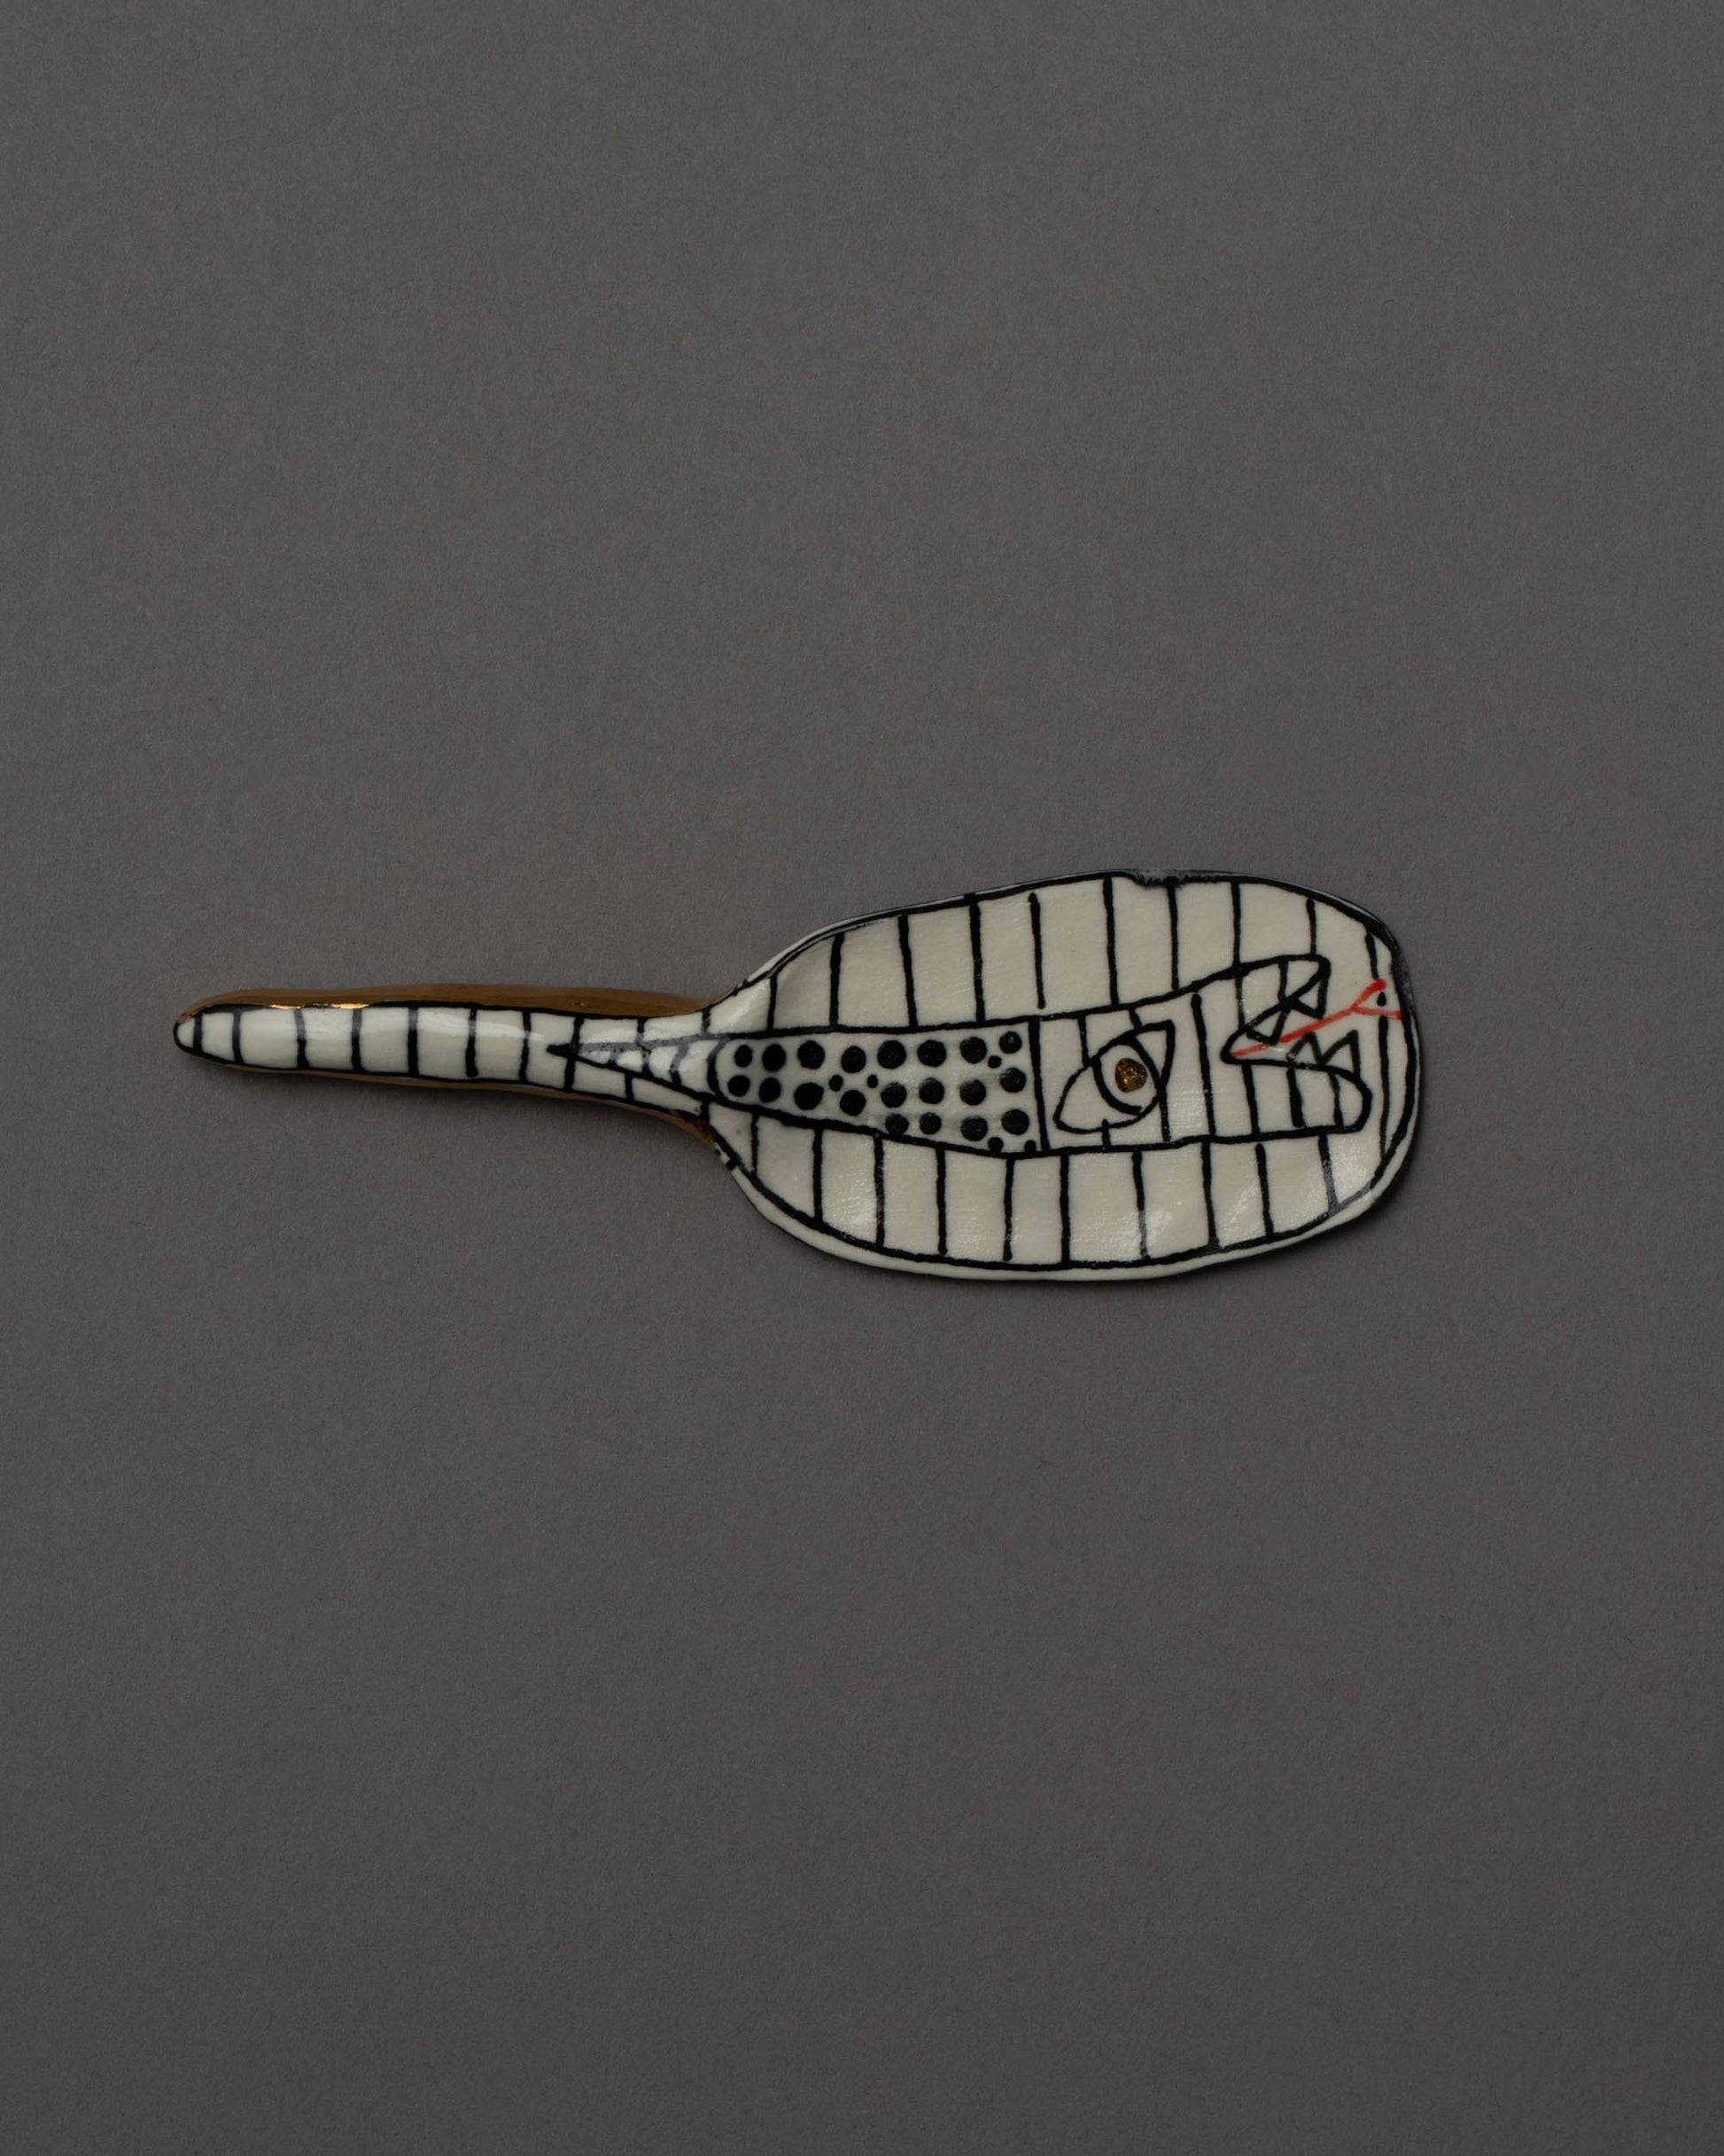 Suzanne Sullivan Considering Utility Cheese Knife Four on grey color background.